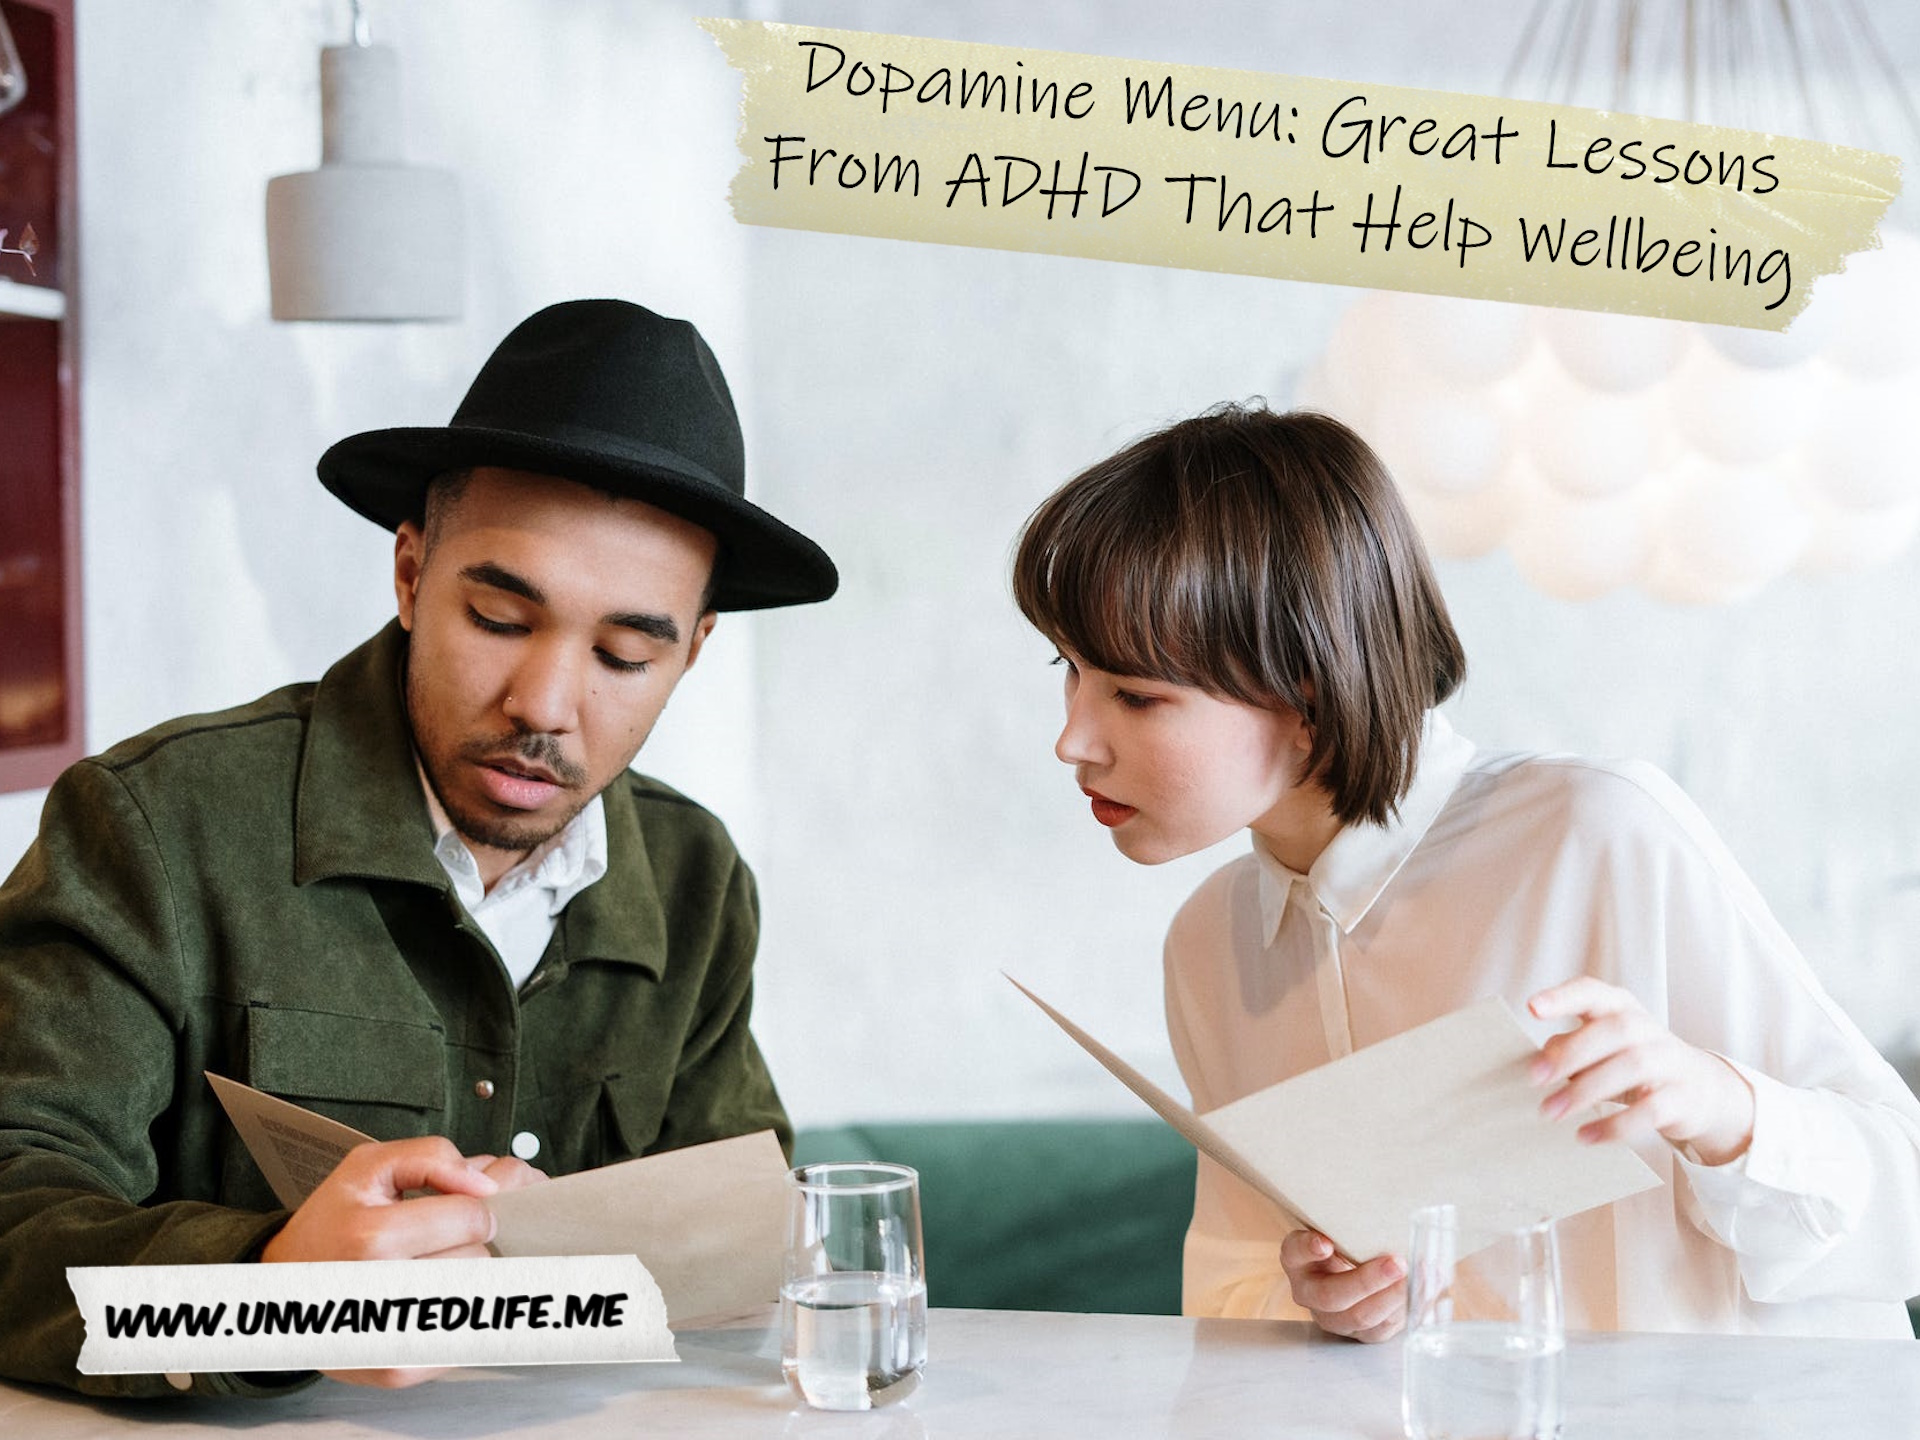 A photo of a man and woman looking at menus together to represent the topic of the article - Dopamine Menu: Great Lessons From ADHD That Benefit Wellbeing